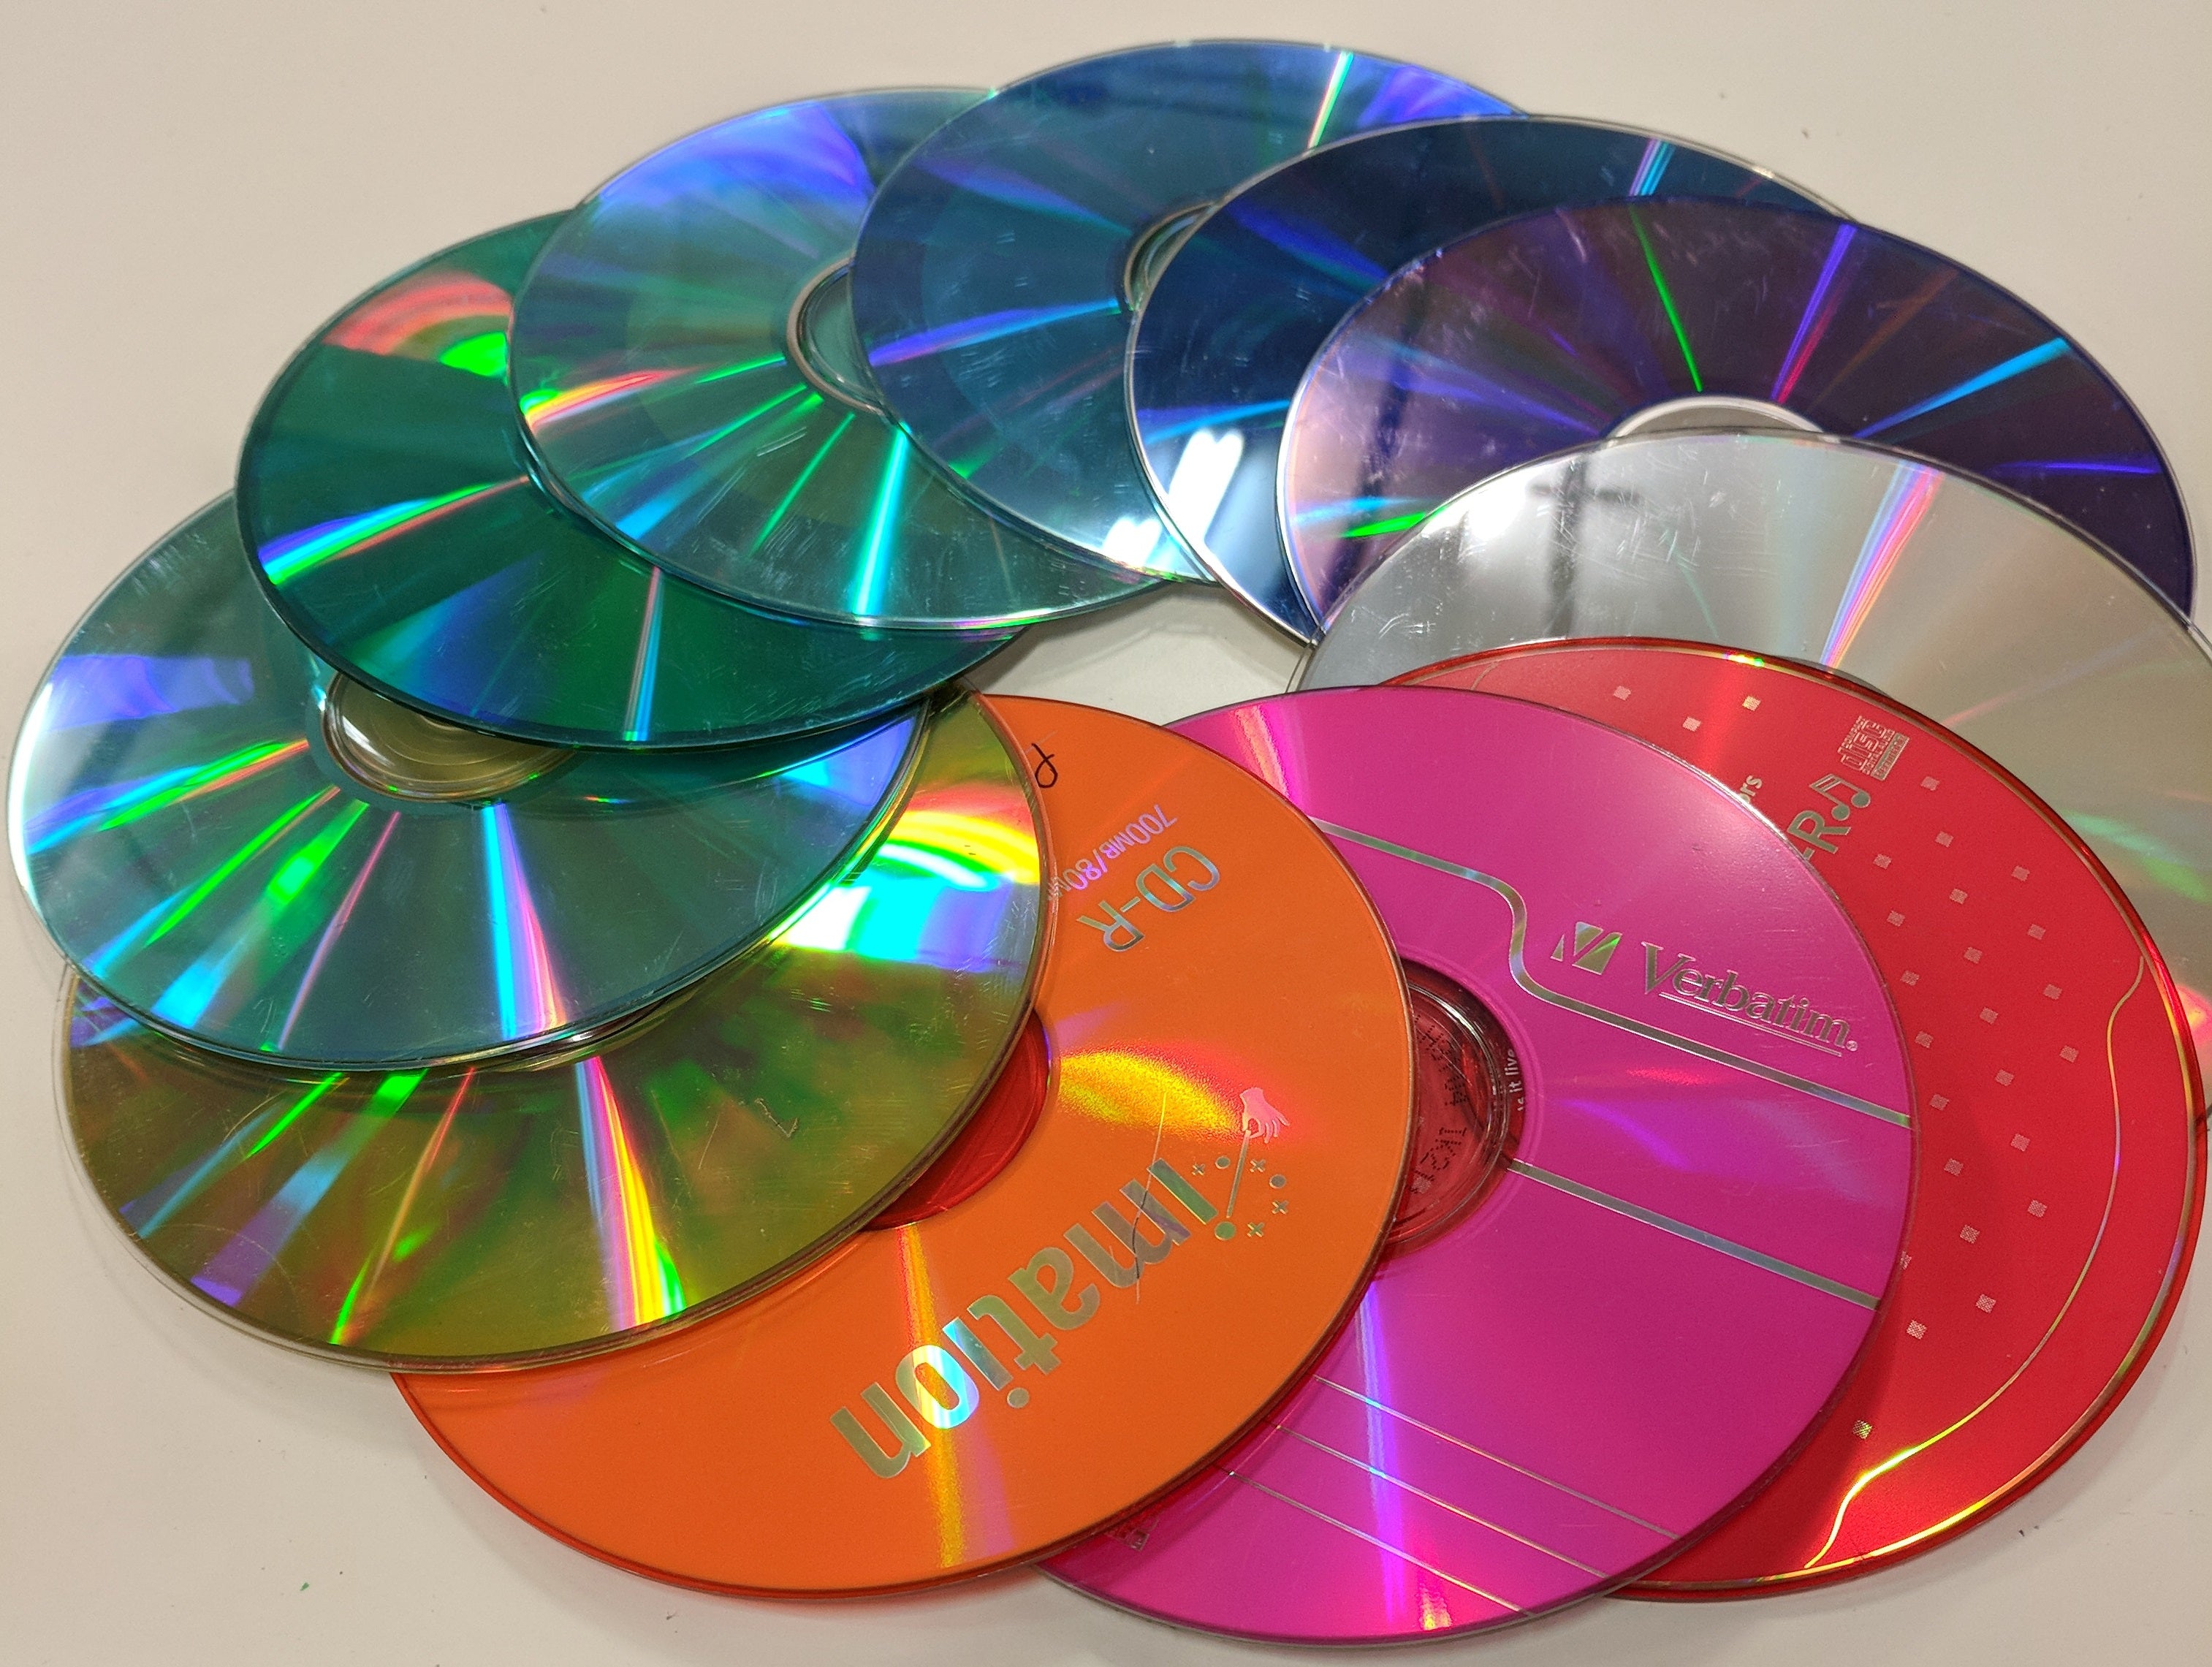 Printing 3D Prints with Recycled CDs & DVDs